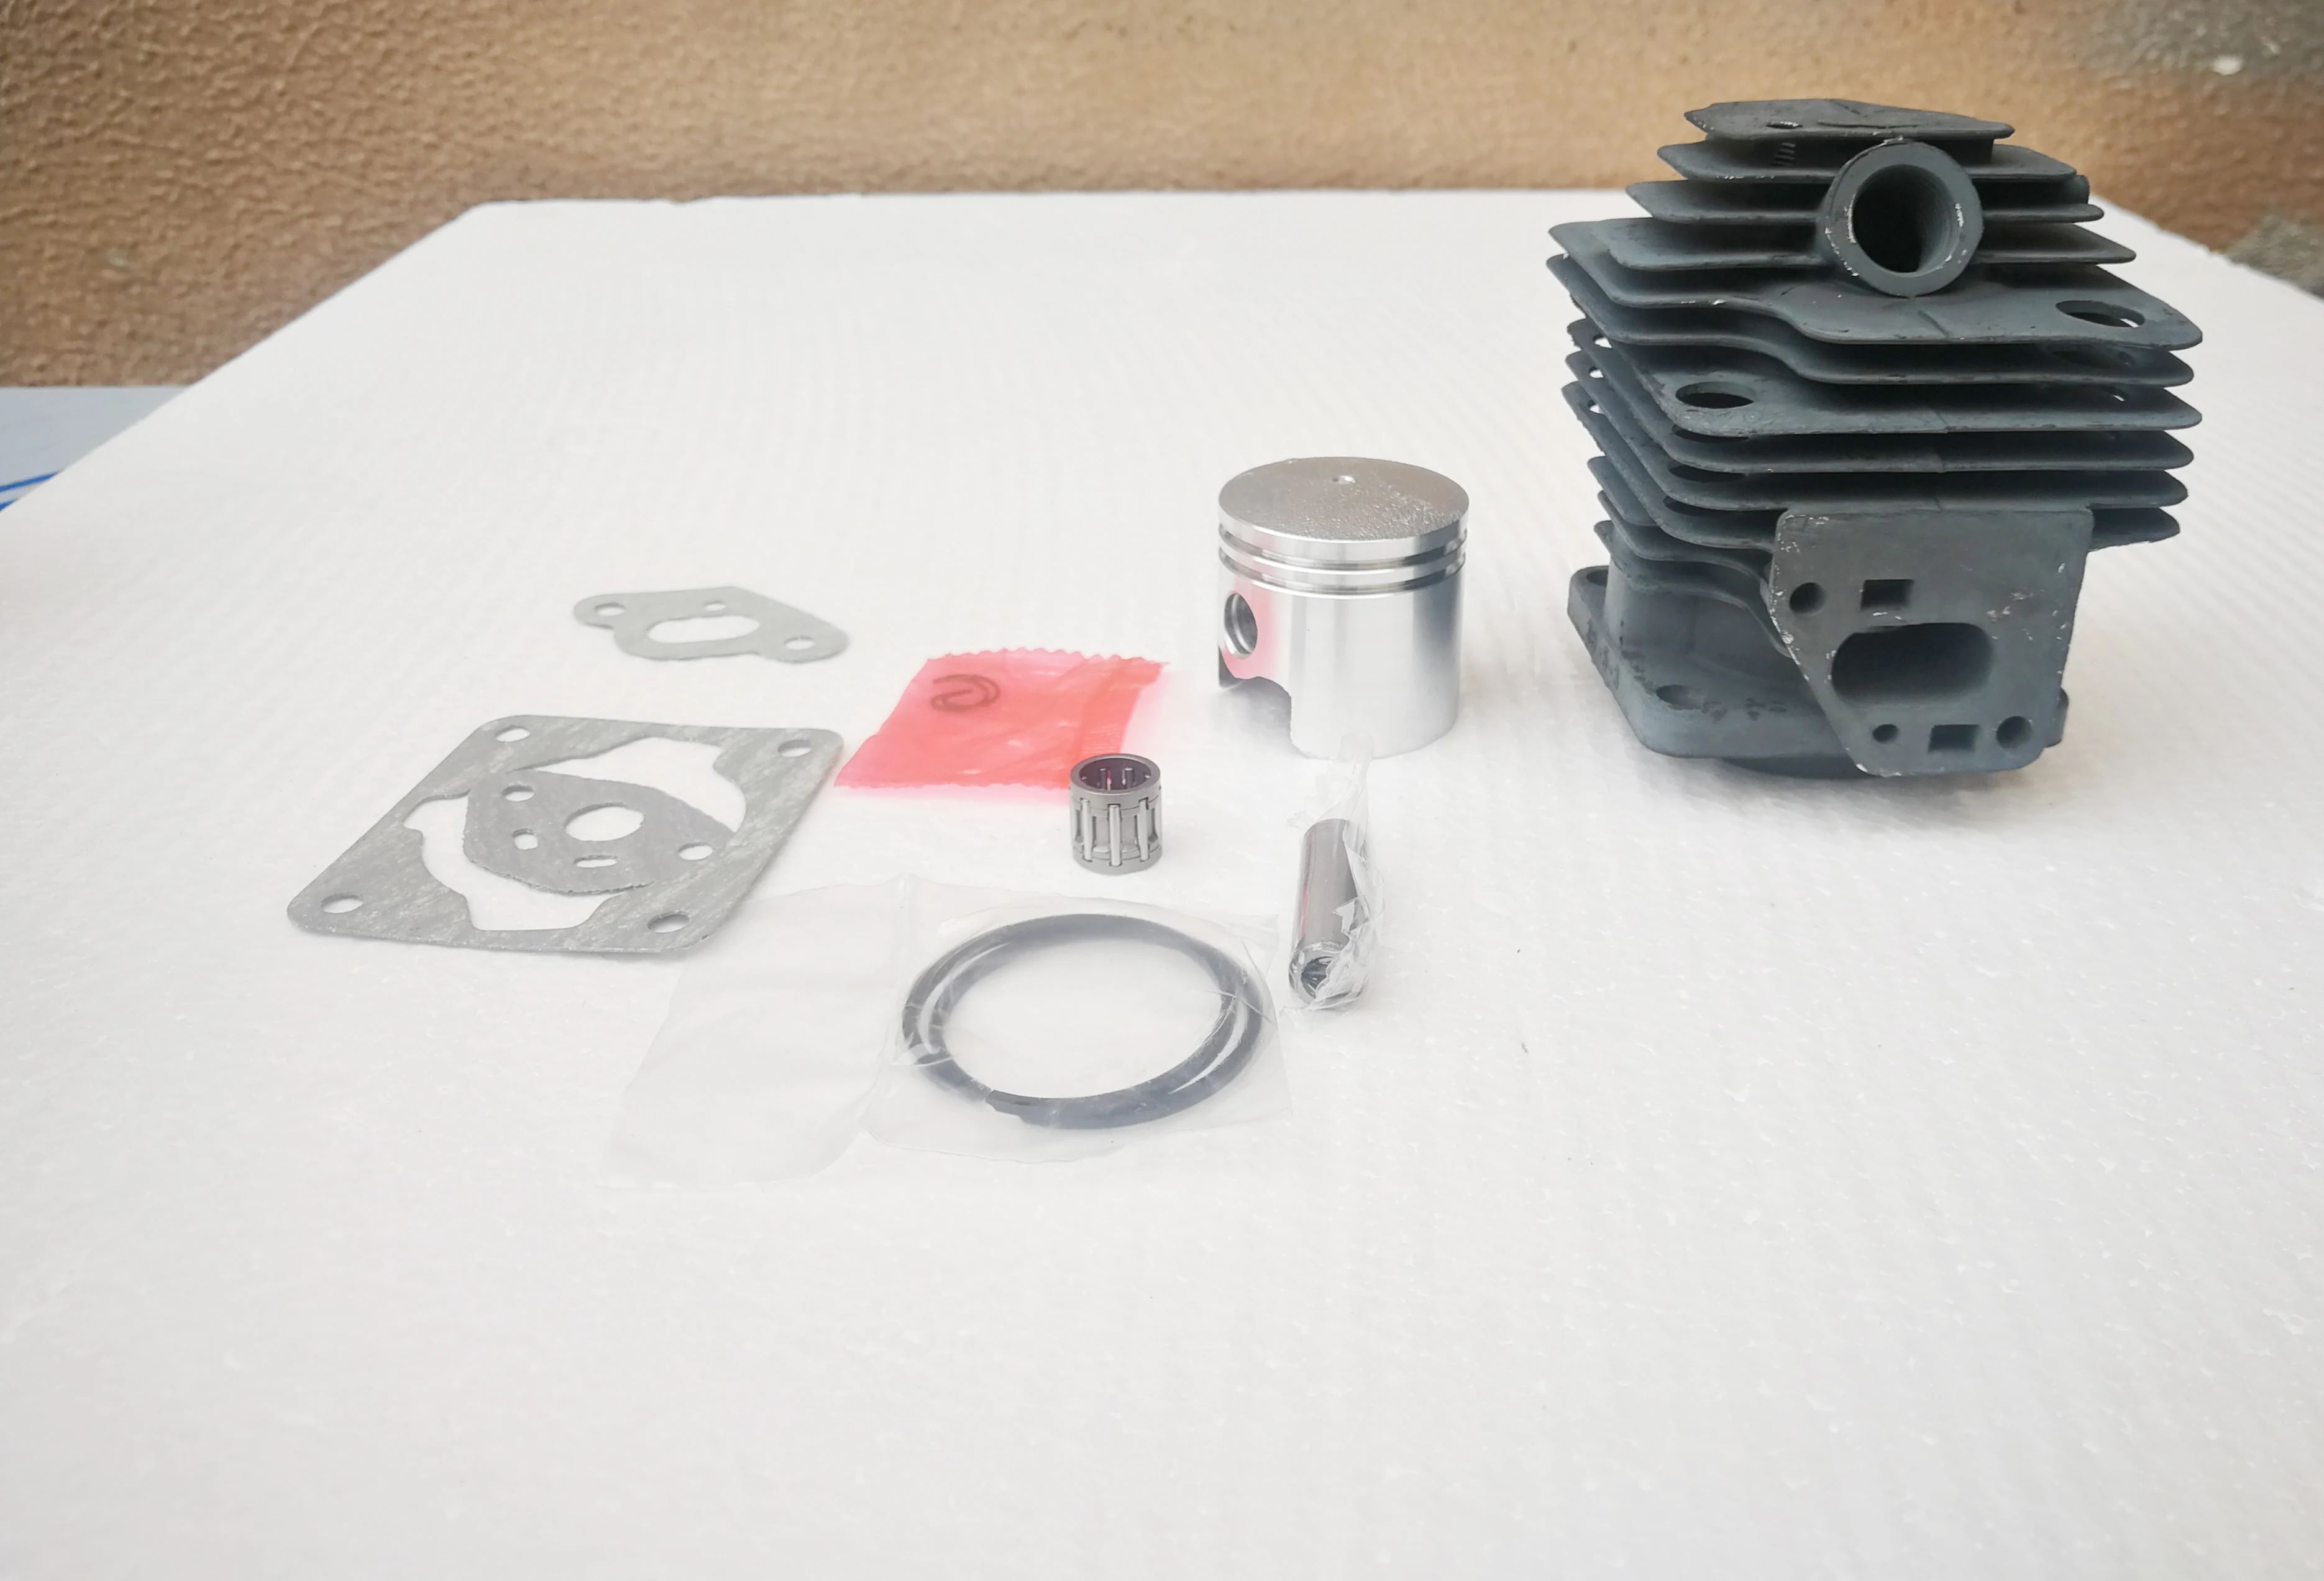 Cylinder Piston 36mm Kits For TL33/CG330 1E36F Lawn Mower Brush Cutter Grass Trimmer Chinese Engine 33cc 1e36f 5b brush cutter mtd smart cylinder piston kit block set dia 36mm for bc 33 grass hedge trimmer mitsubishi tb33 tu33